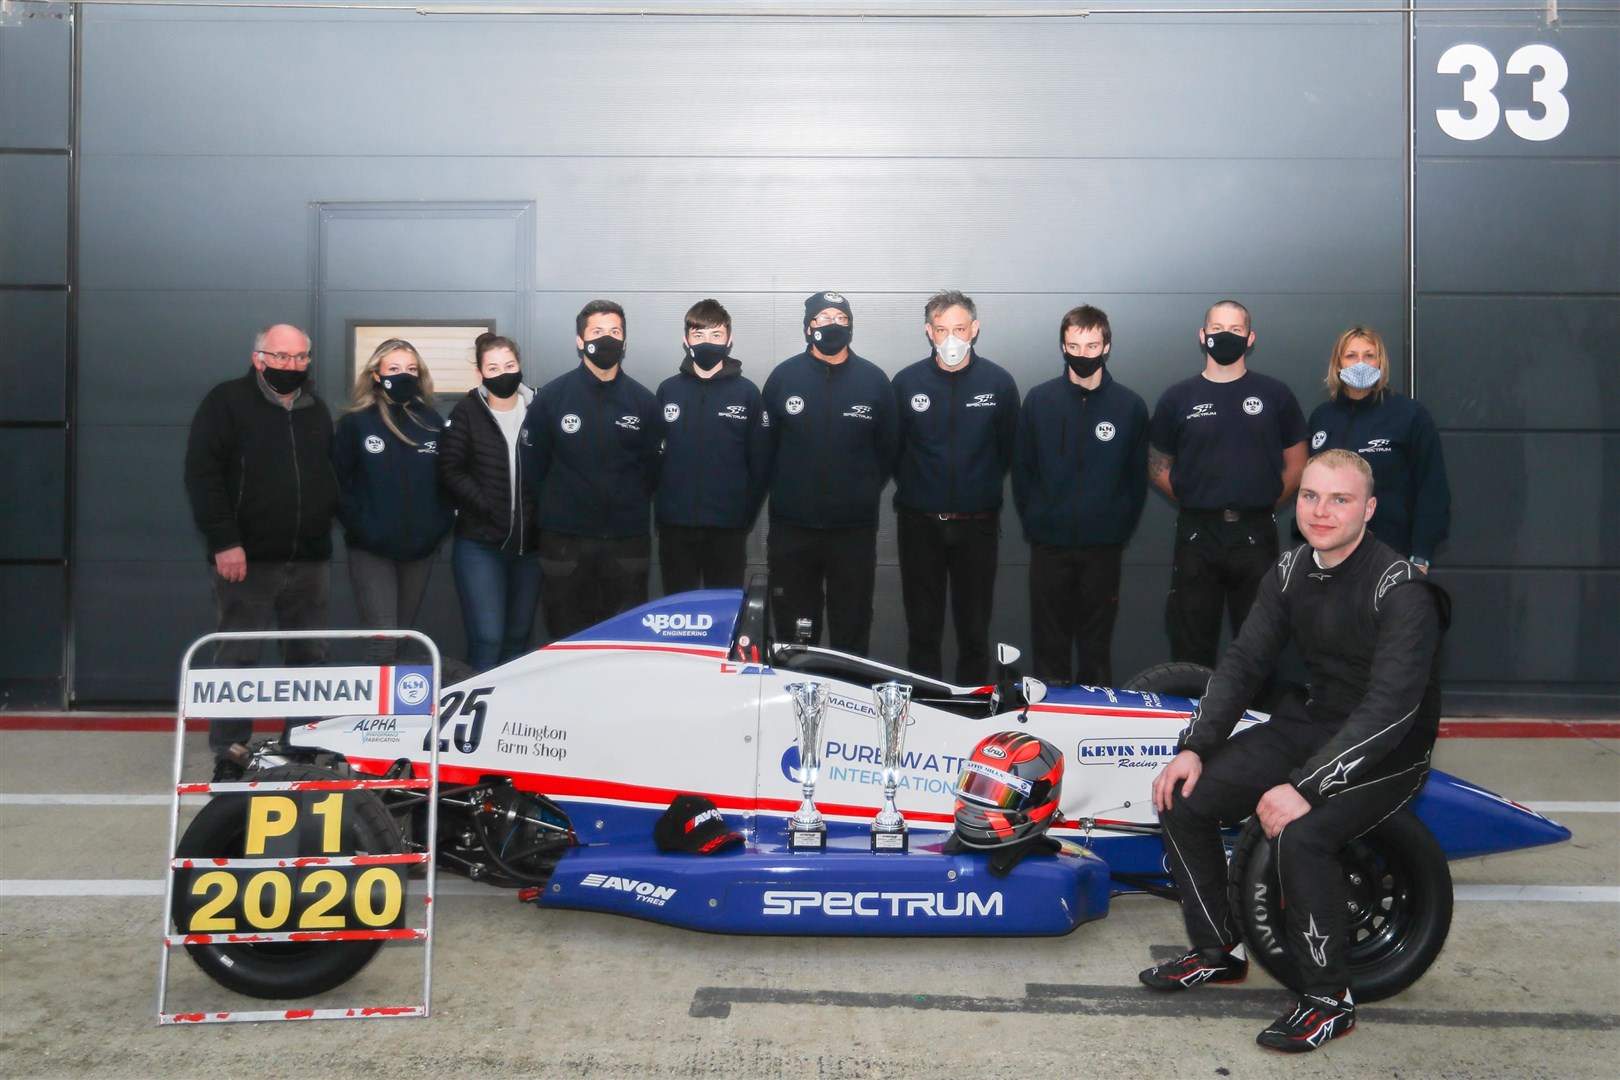 Neil Maclennan with his team at Kevin Mills Racing.